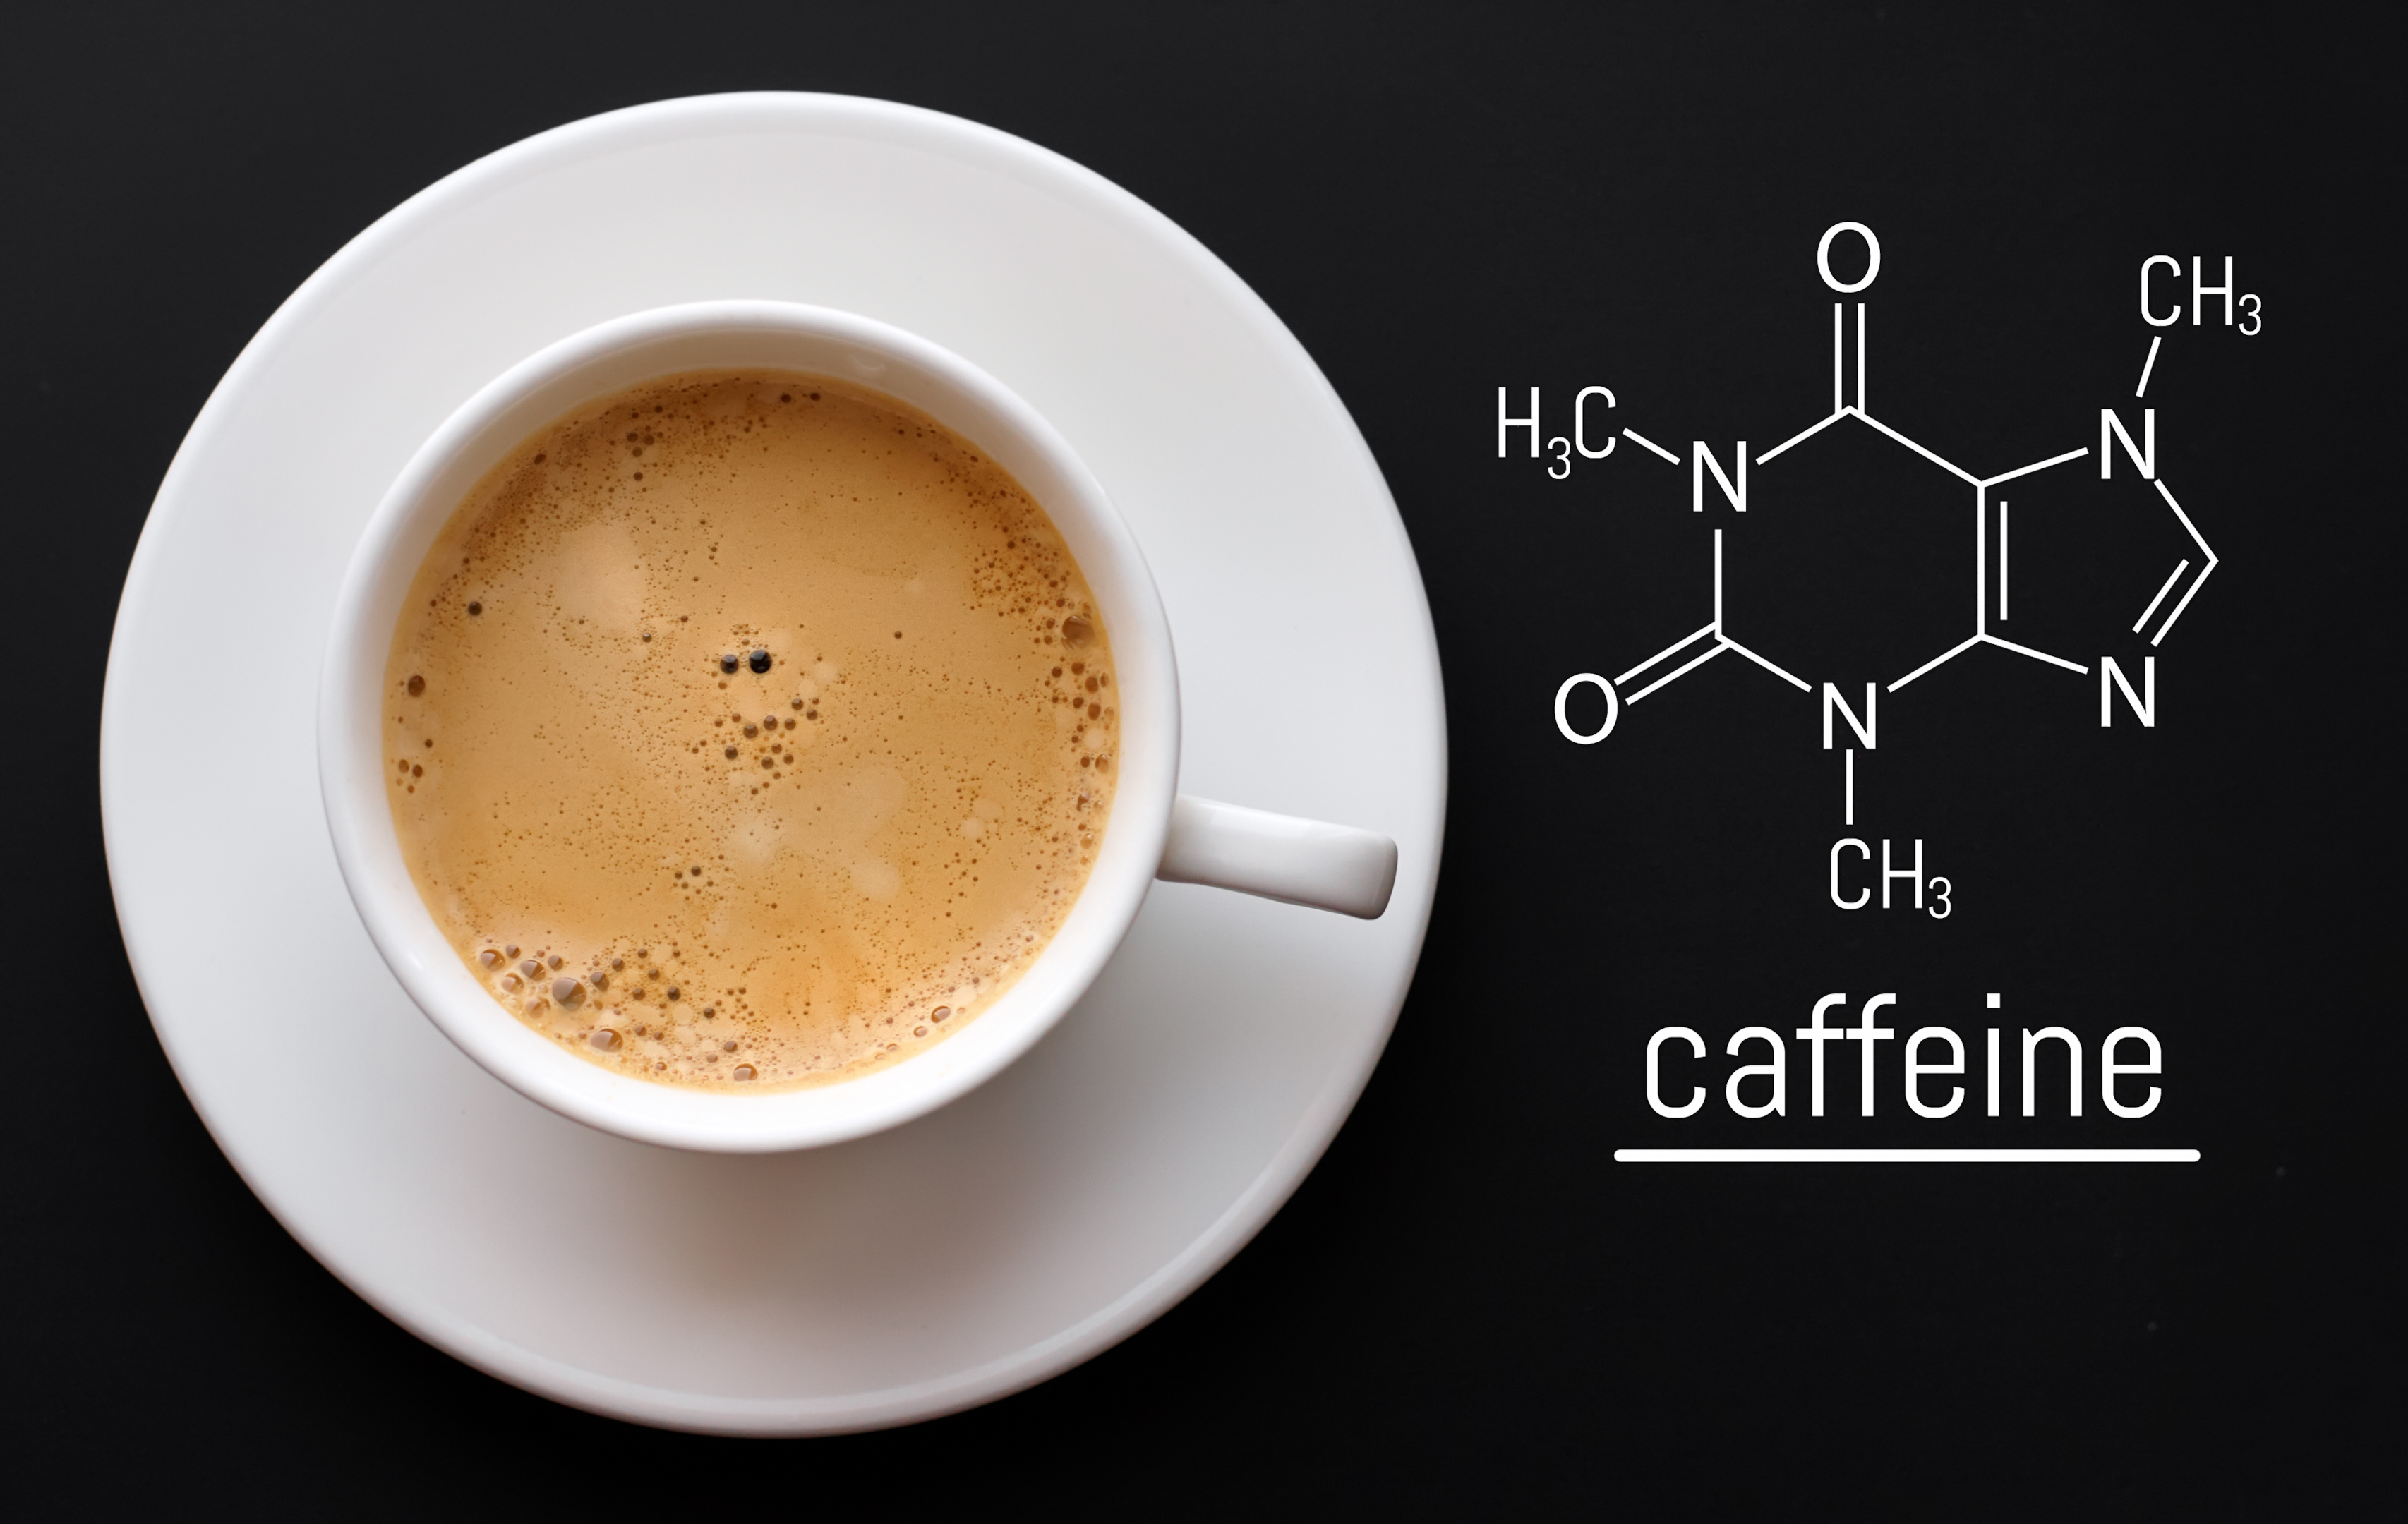 Caffeine can be a health issues for some